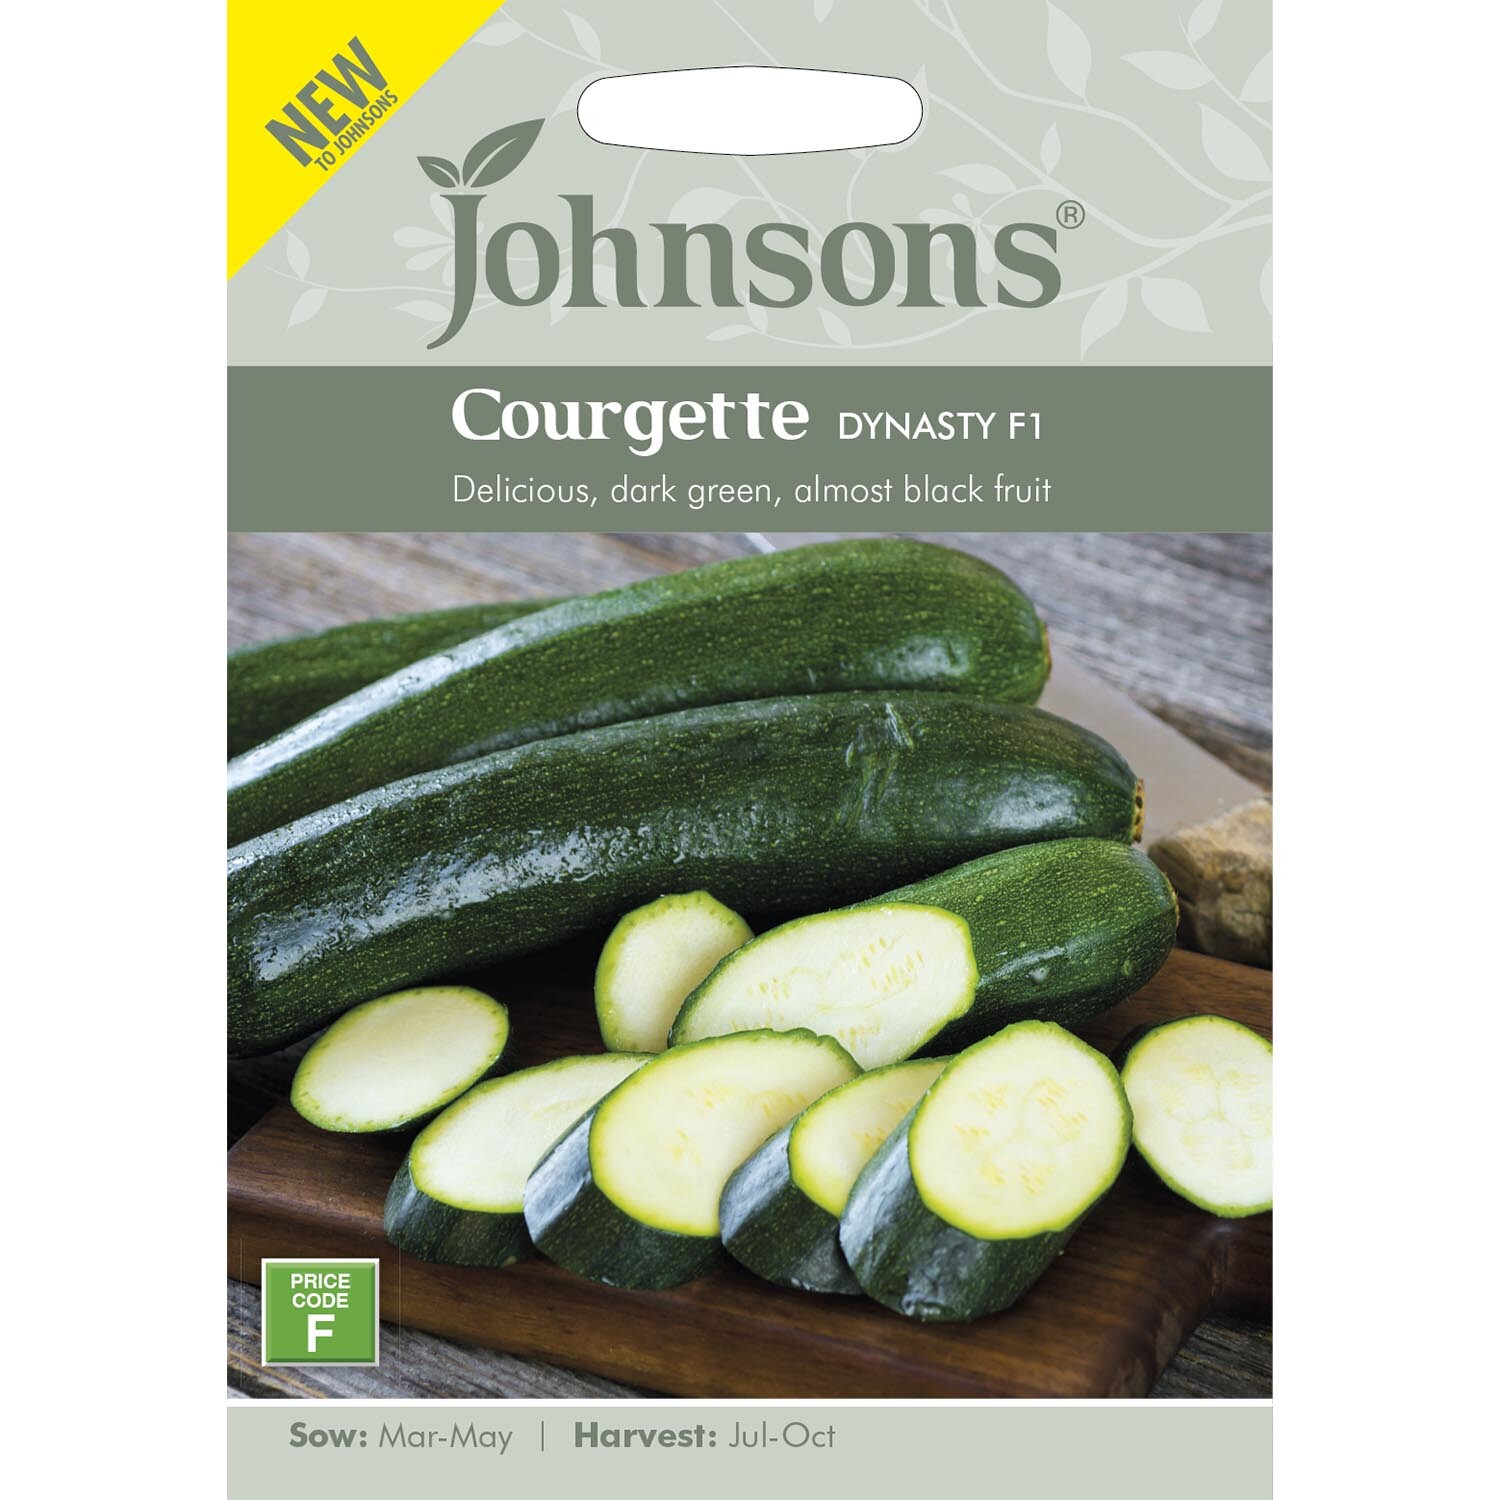 Johnsons Courgette Dynasty F1 Vegetable Seeds Image 2